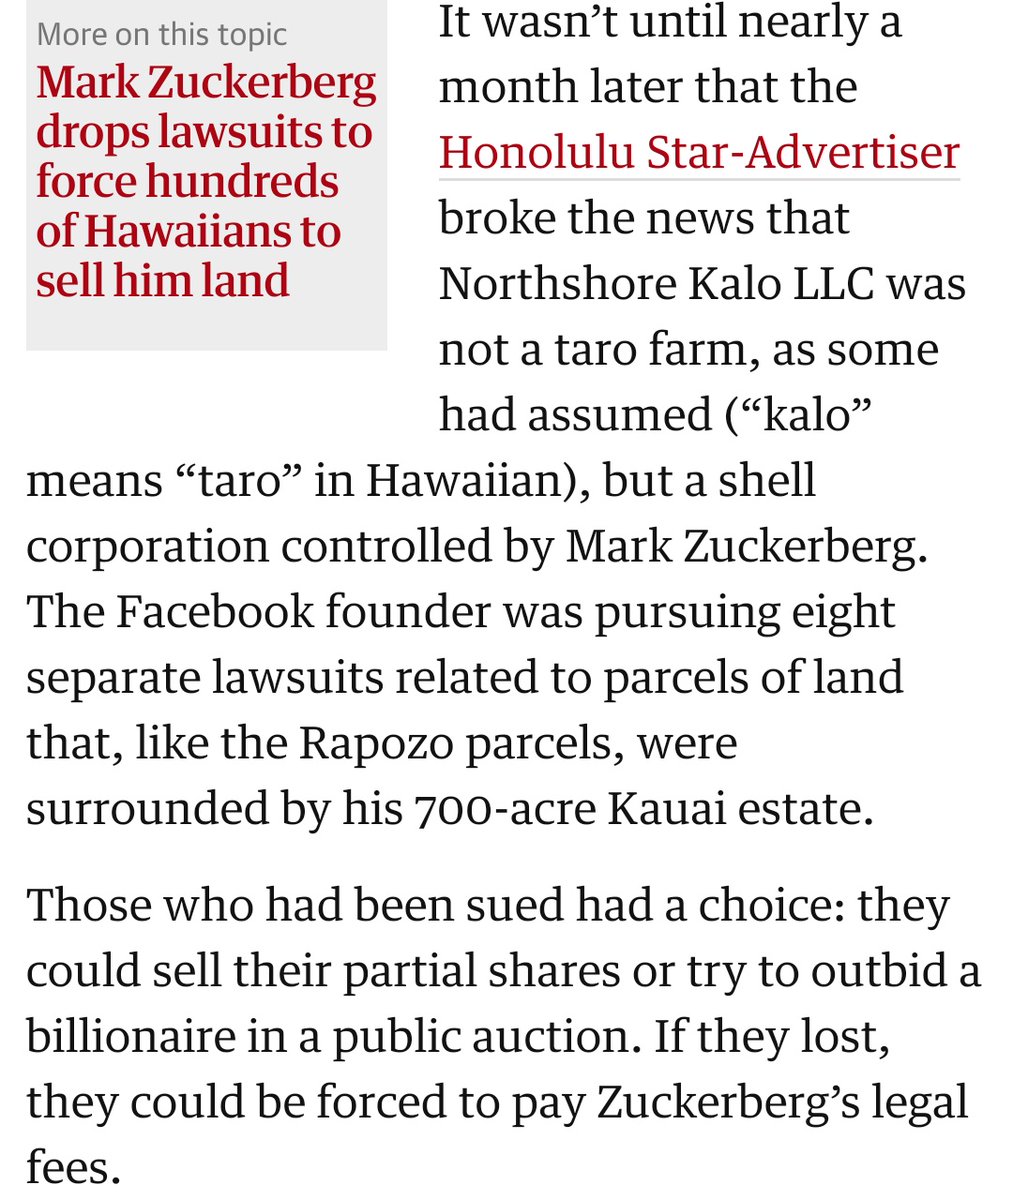 Mark Zuckerberg literally set up a local sounding shell corporation to approach local land owners, offer to pay legal fees to clear up titling claims, and then force it to public auction where mark could bankroll and snatch themhis house is an eyesore and I hope it burns